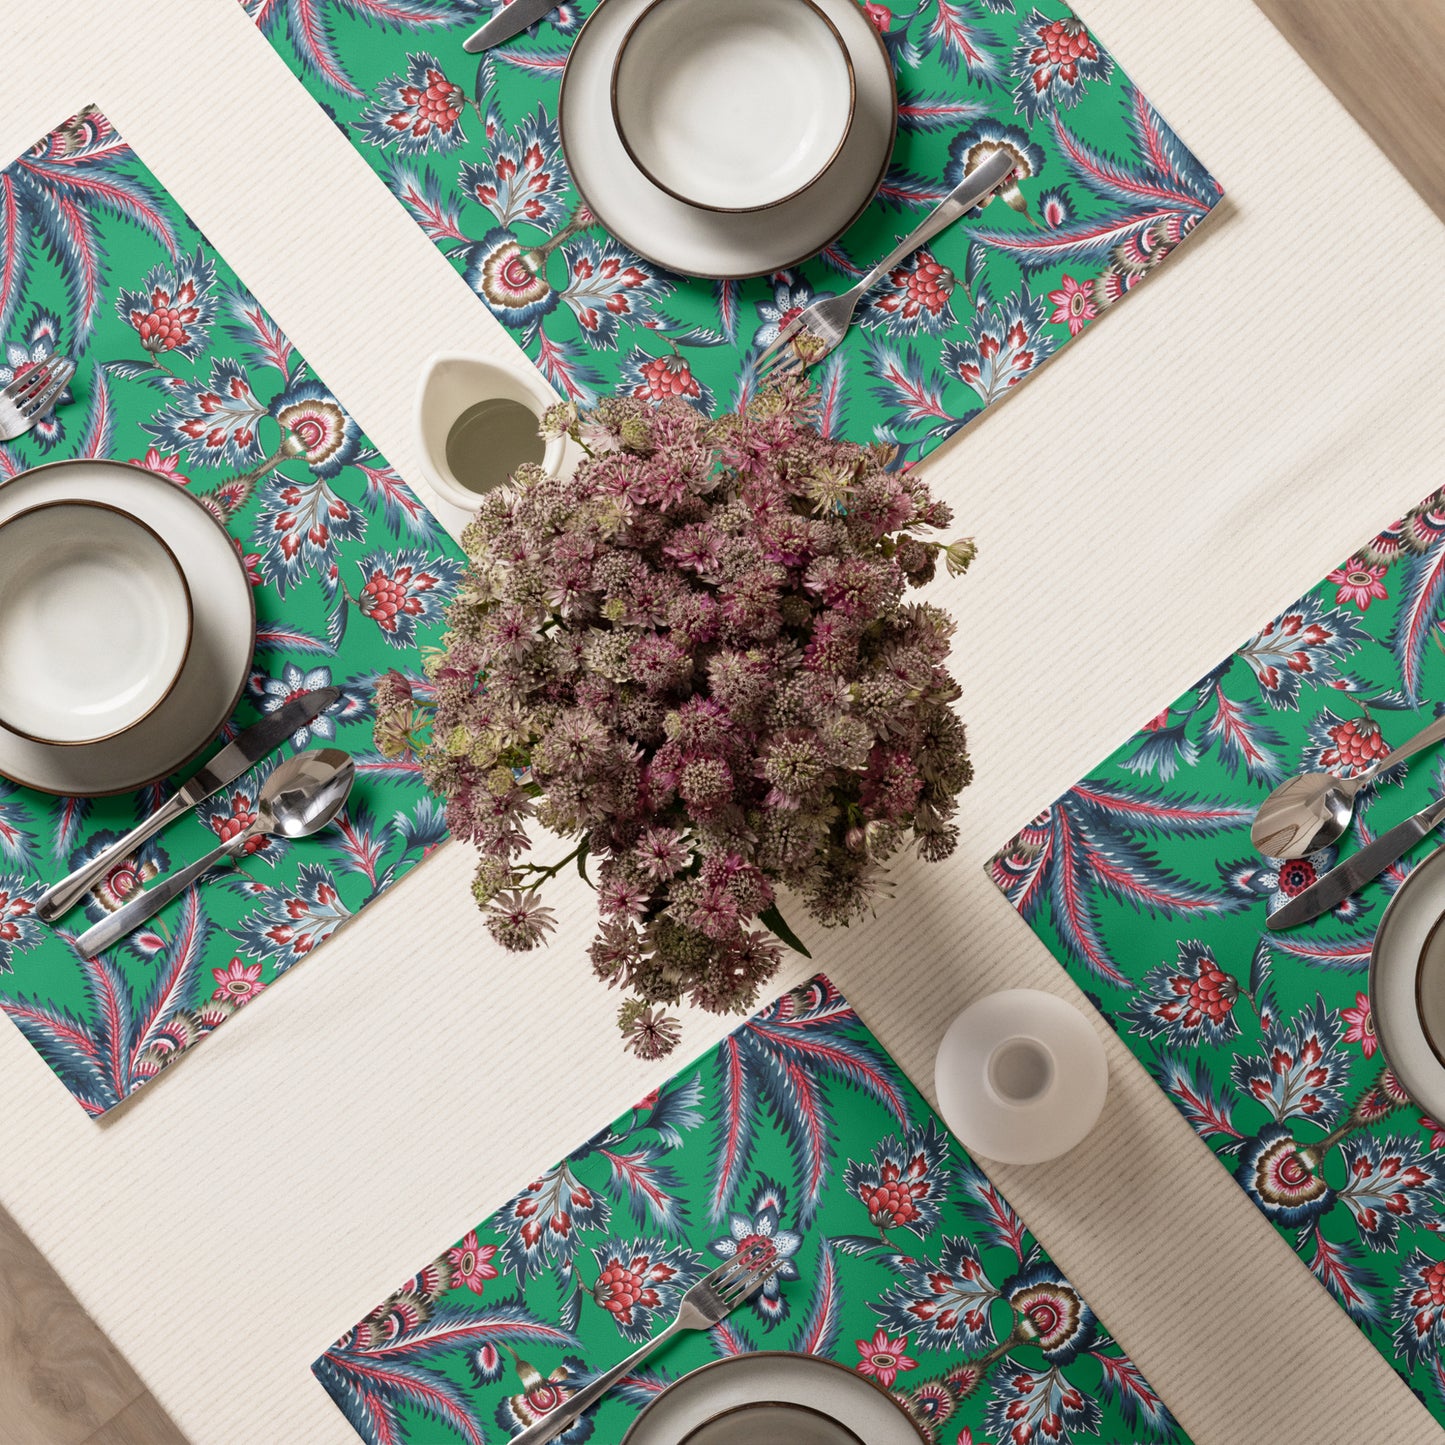 Chaya Green Placemats (Set of 4), Tropical Placemats | Dusk & Bloom